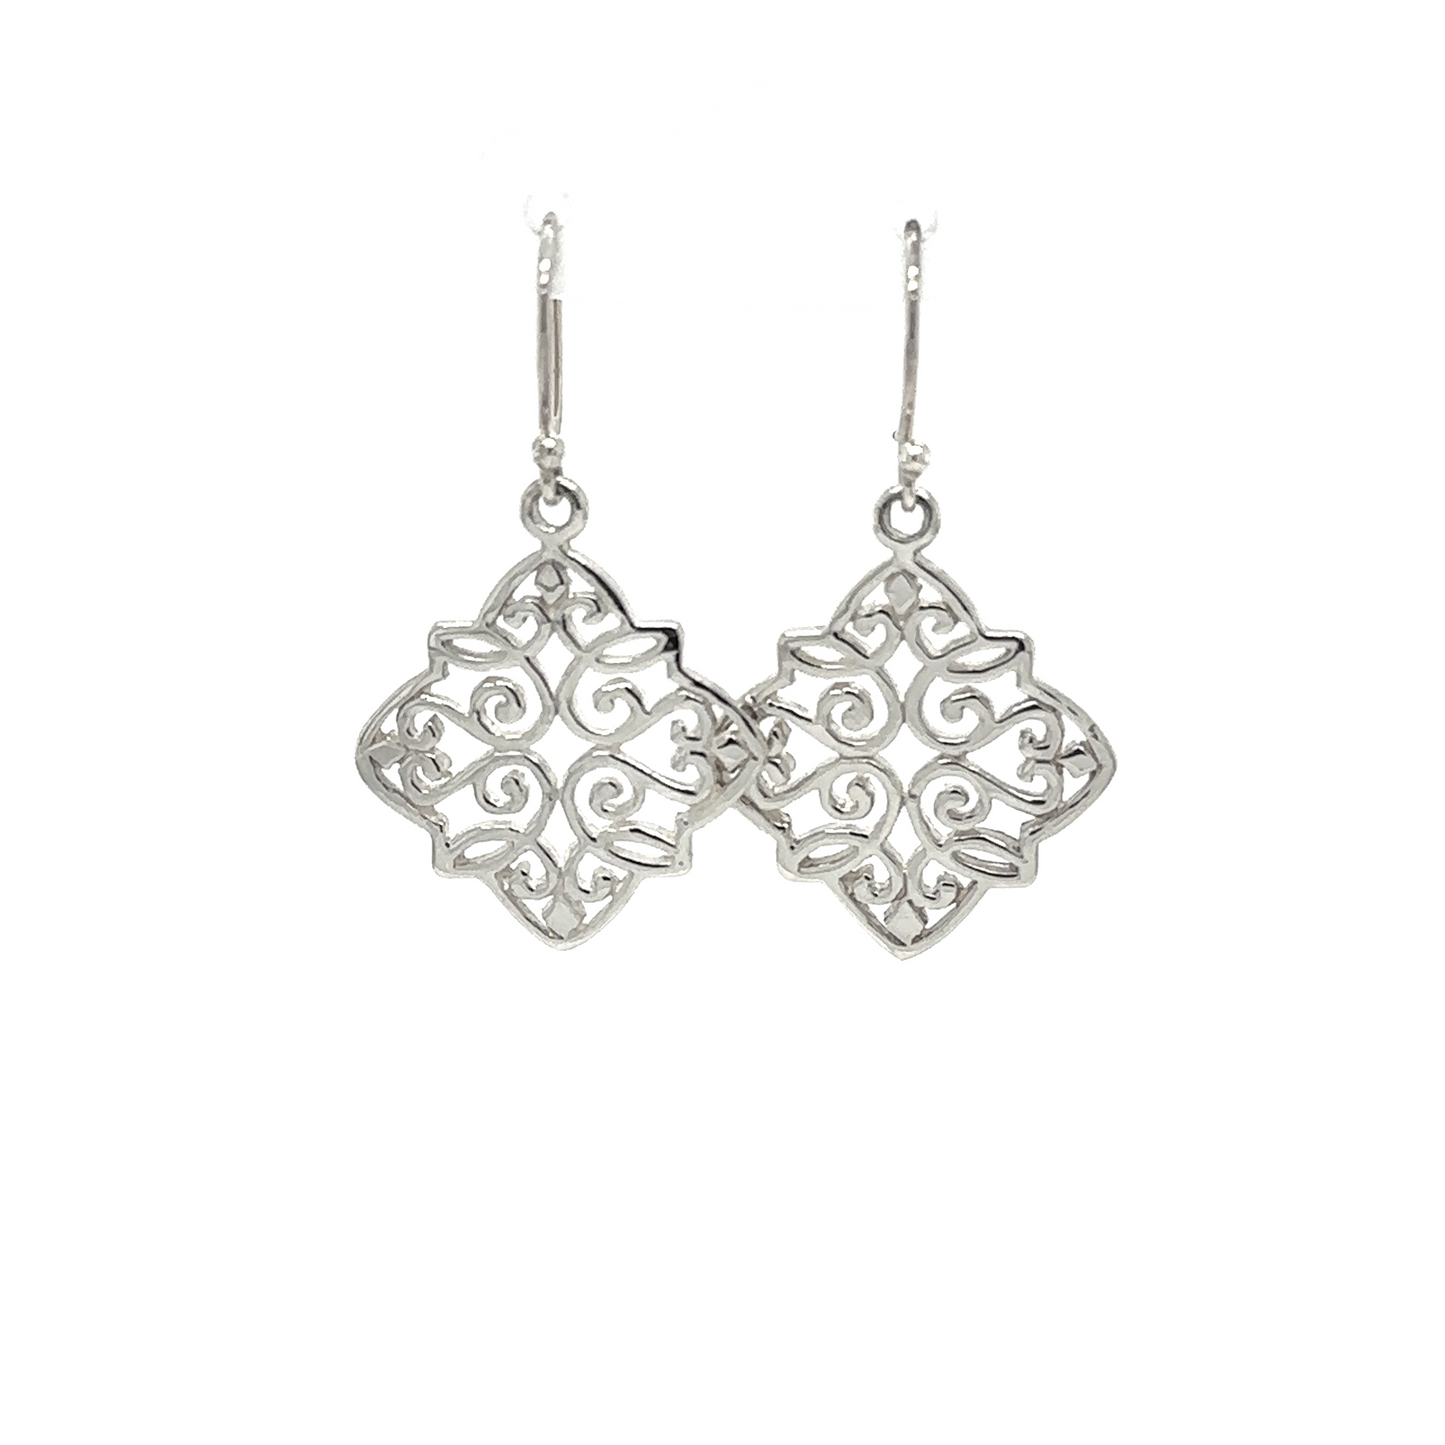 A pair of Super Silver Diamond Shaped Earrings with Swirl Design. These exquisite earrings feature a stunning Super Silver filigree pattern with intricate details. The earrings are crafted with high-quality sterling silver, making